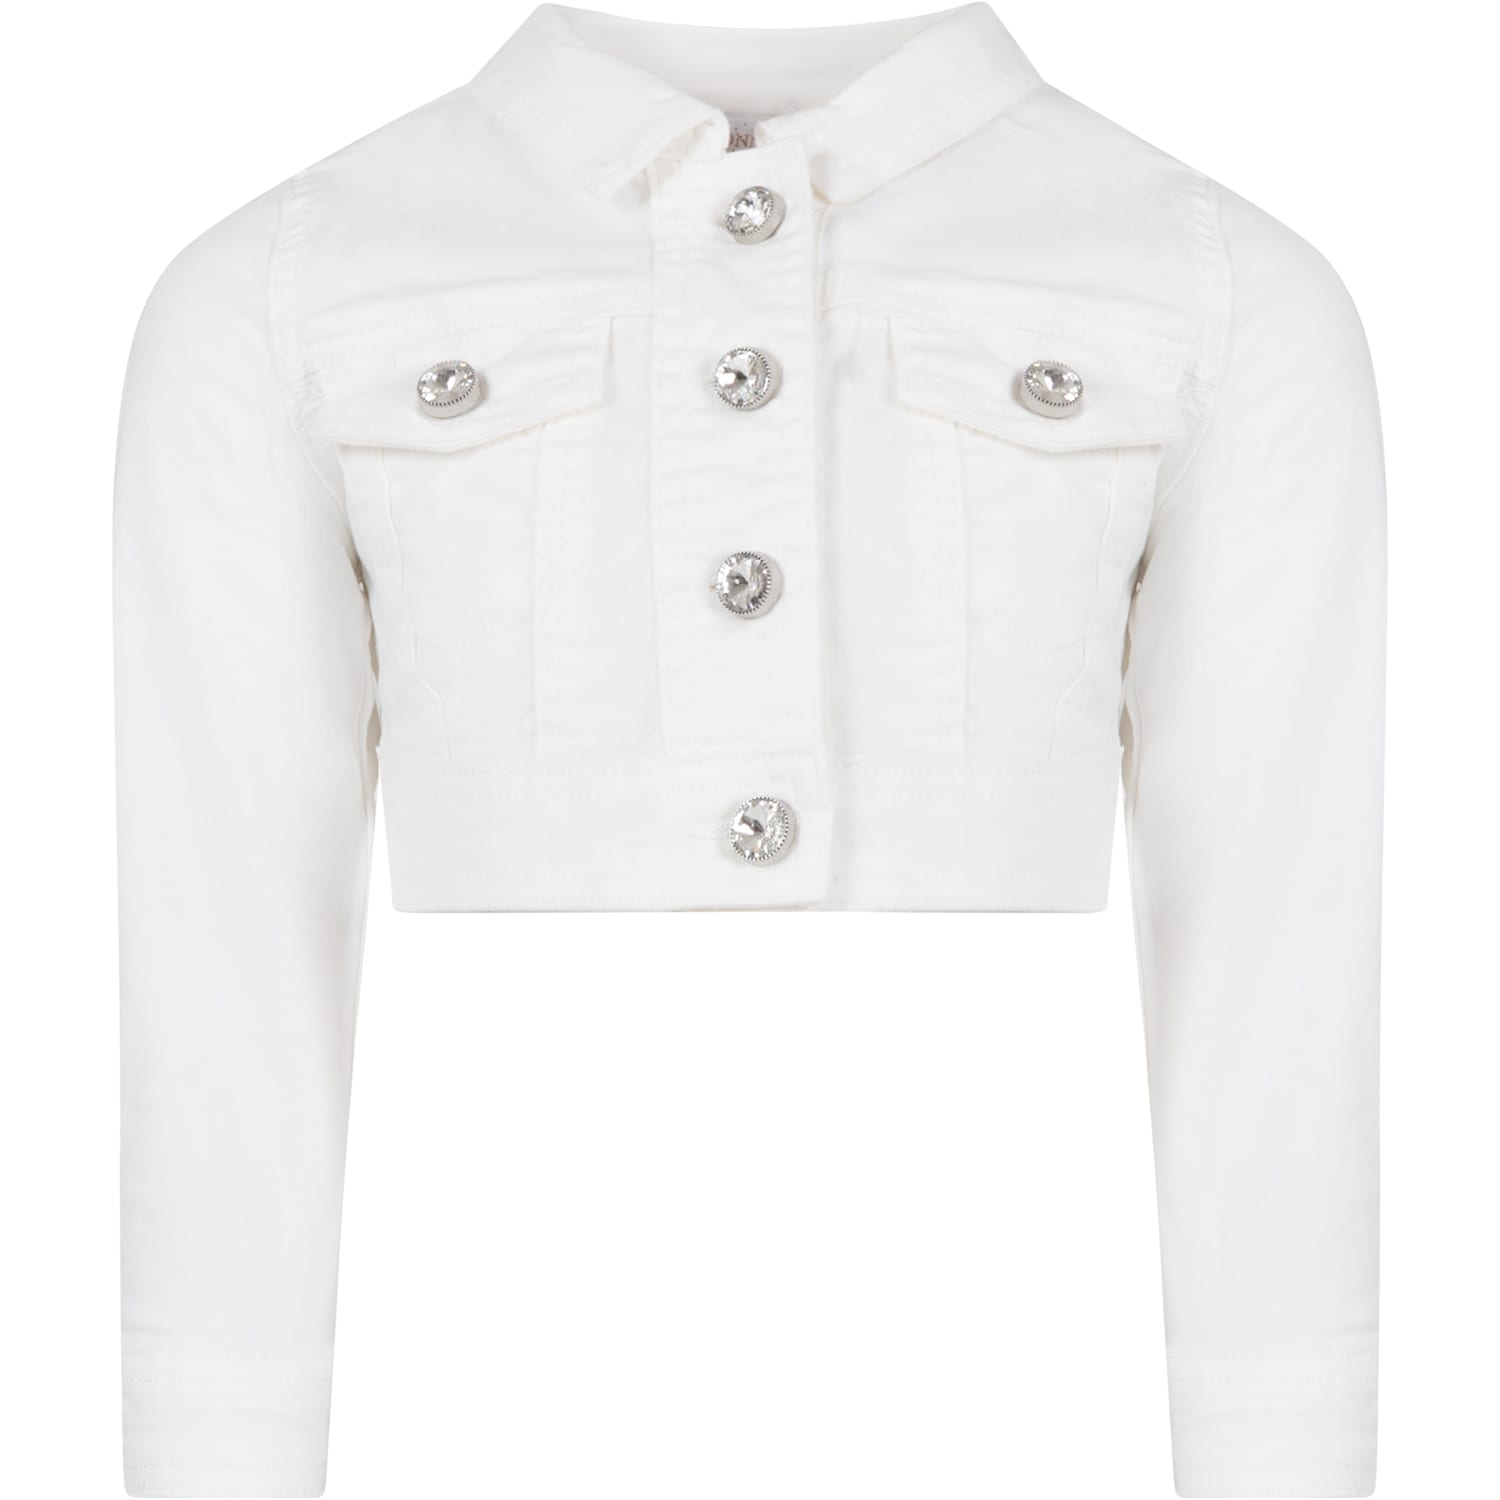 Monnalisa Kids' White Jacket For Girl With Jewel Buttons